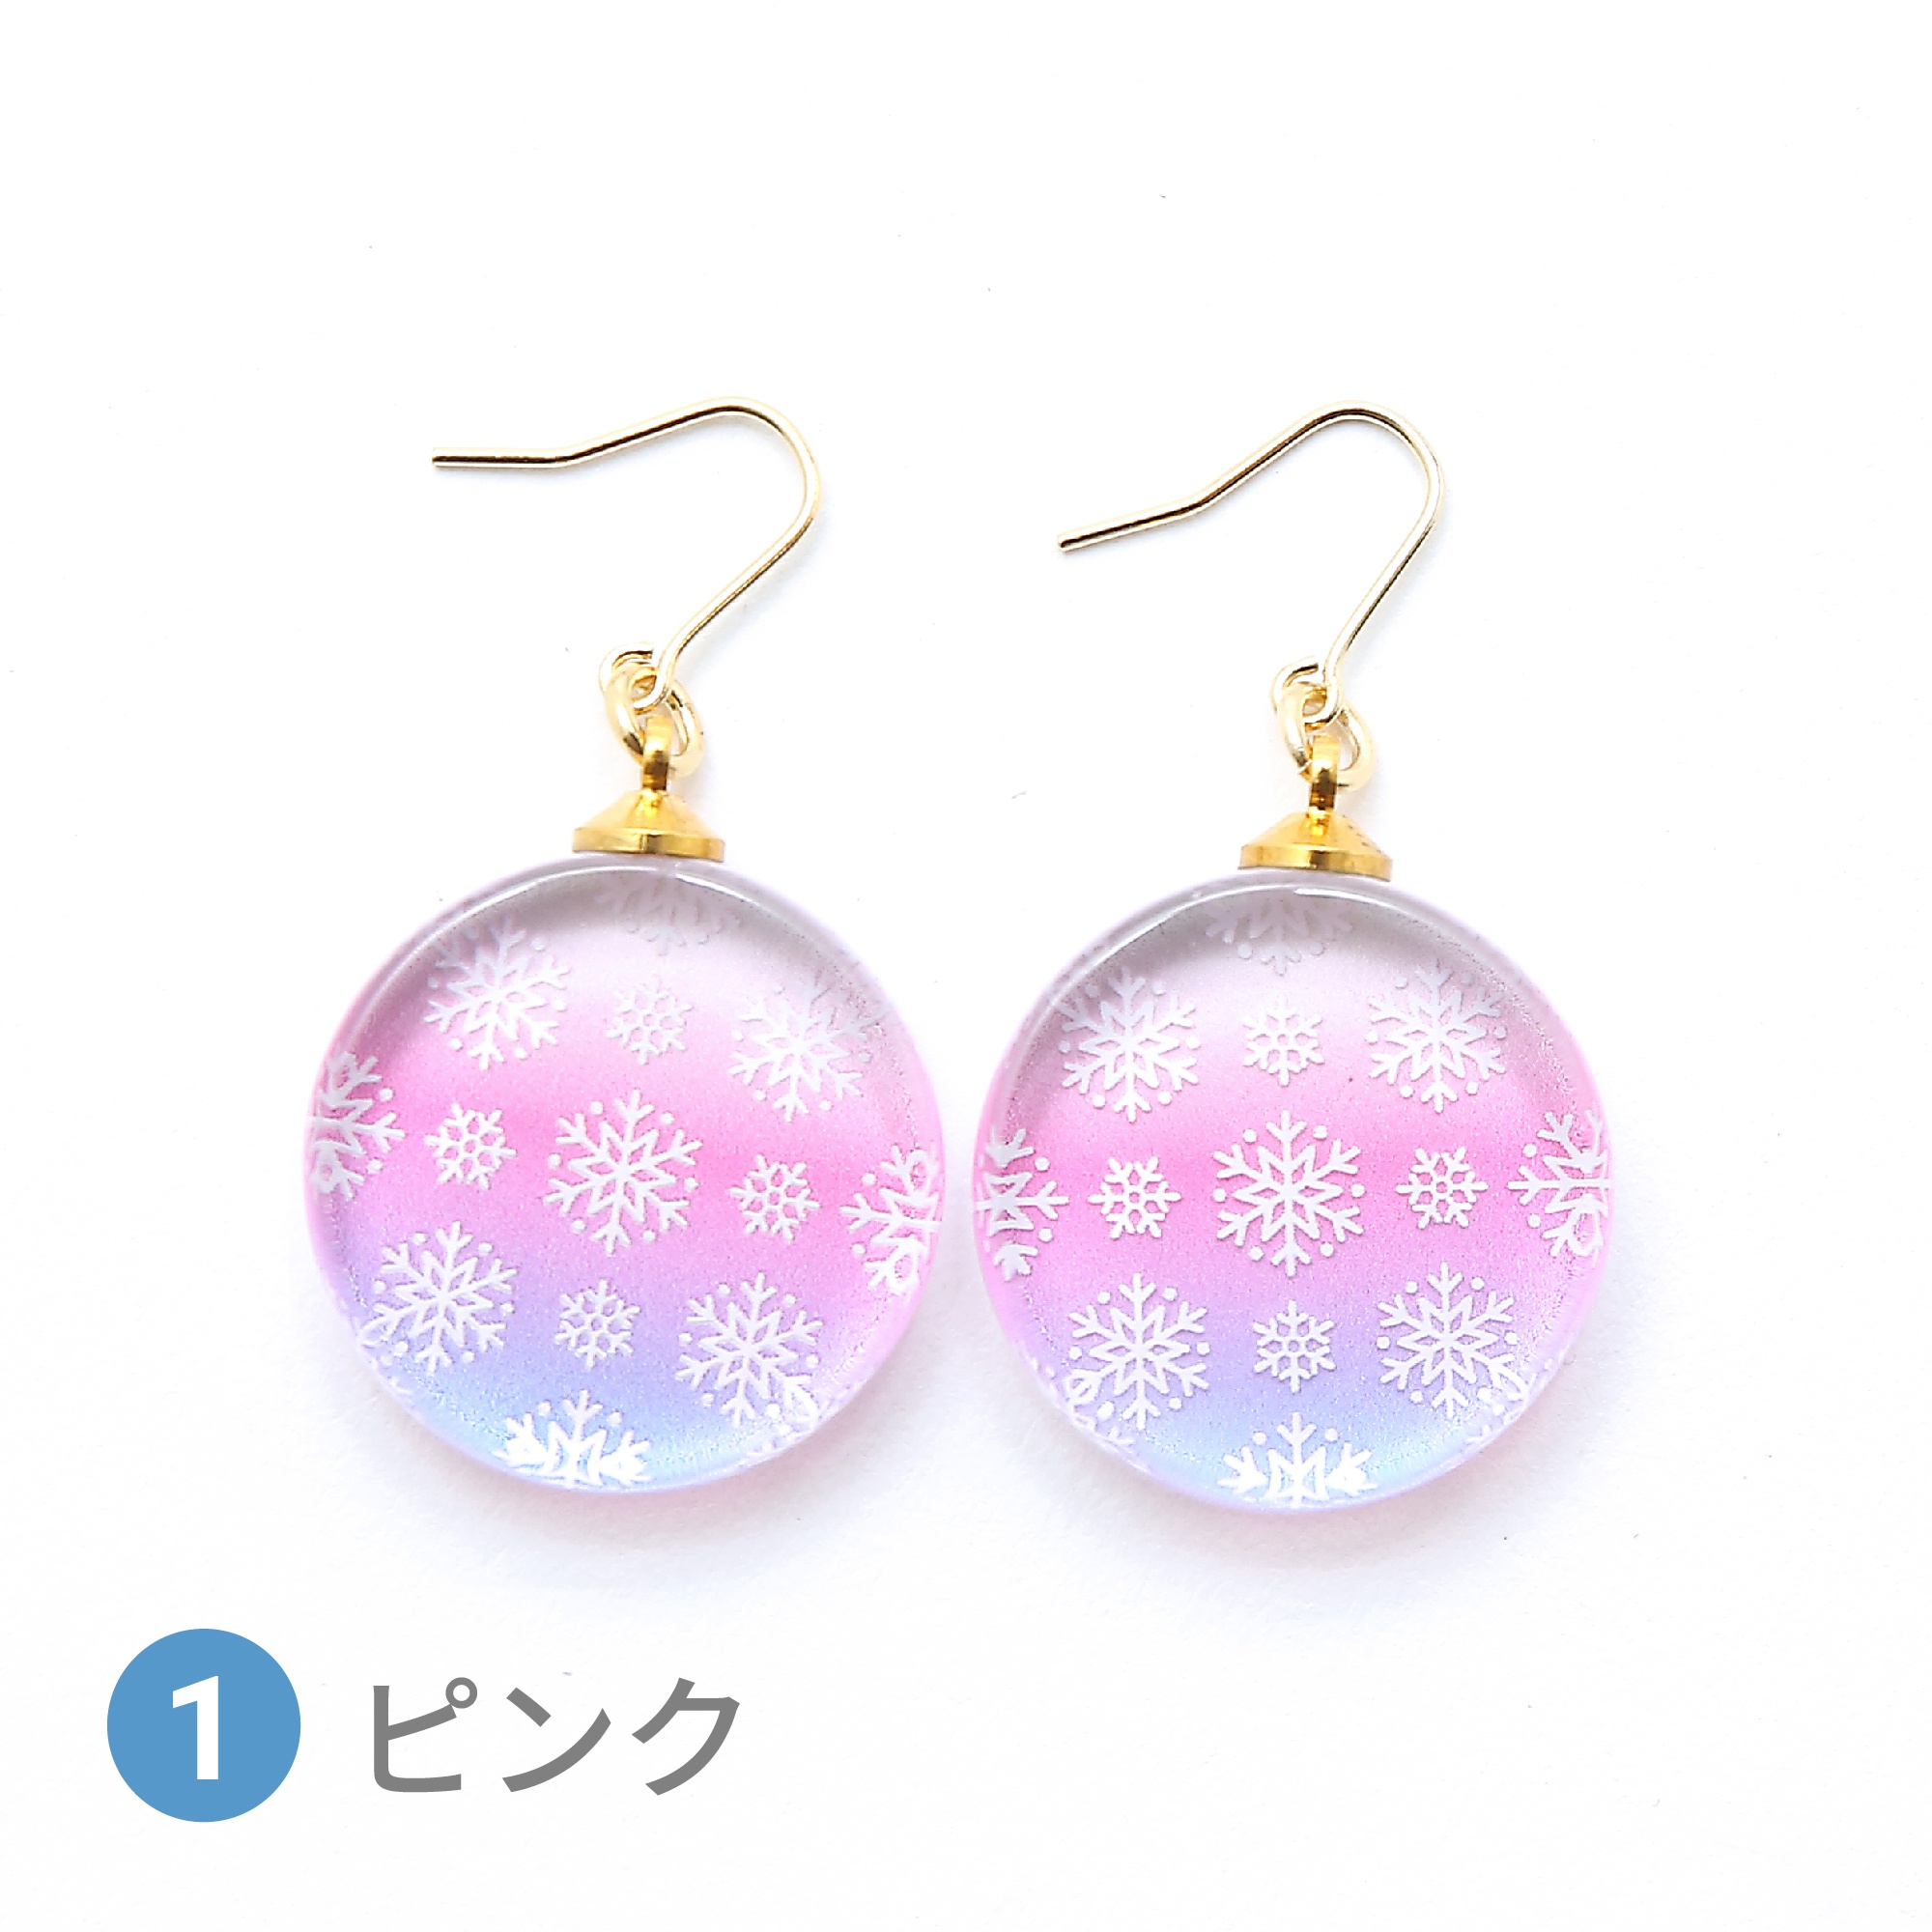 Glass accessories Pierced Earring snow flake pink round shape